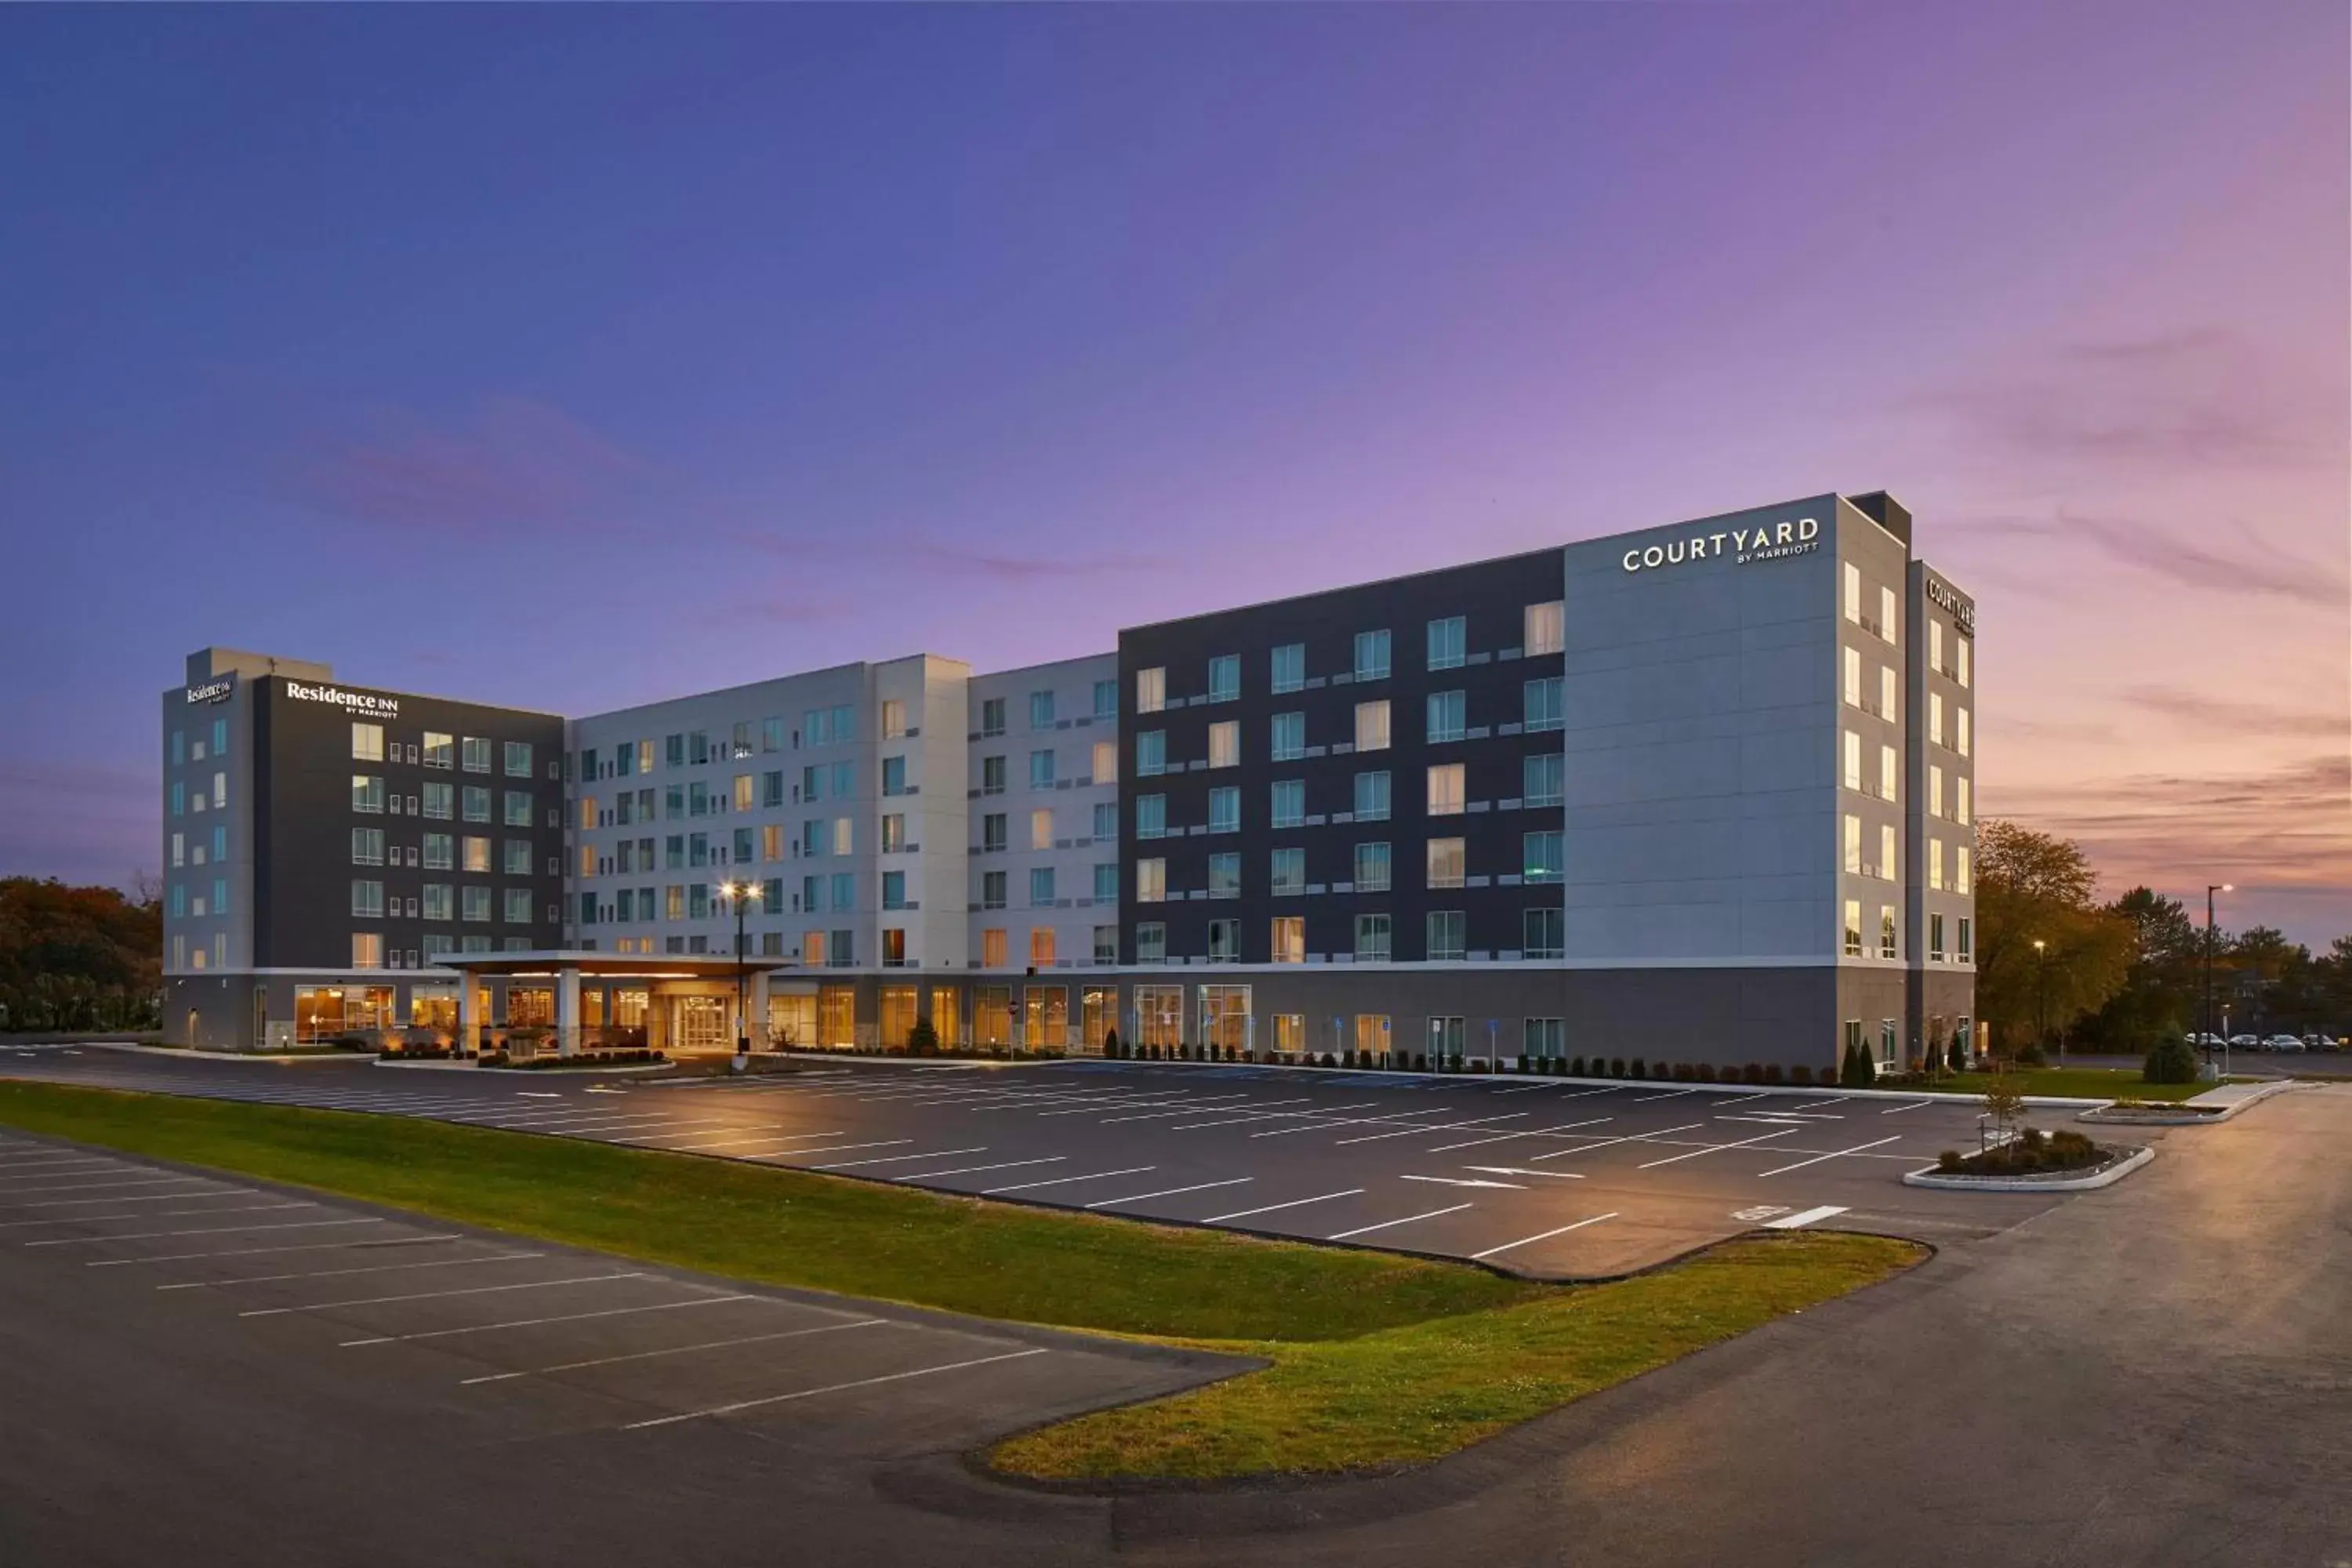 Property Building in Residence Inn by Marriott Albany Airport